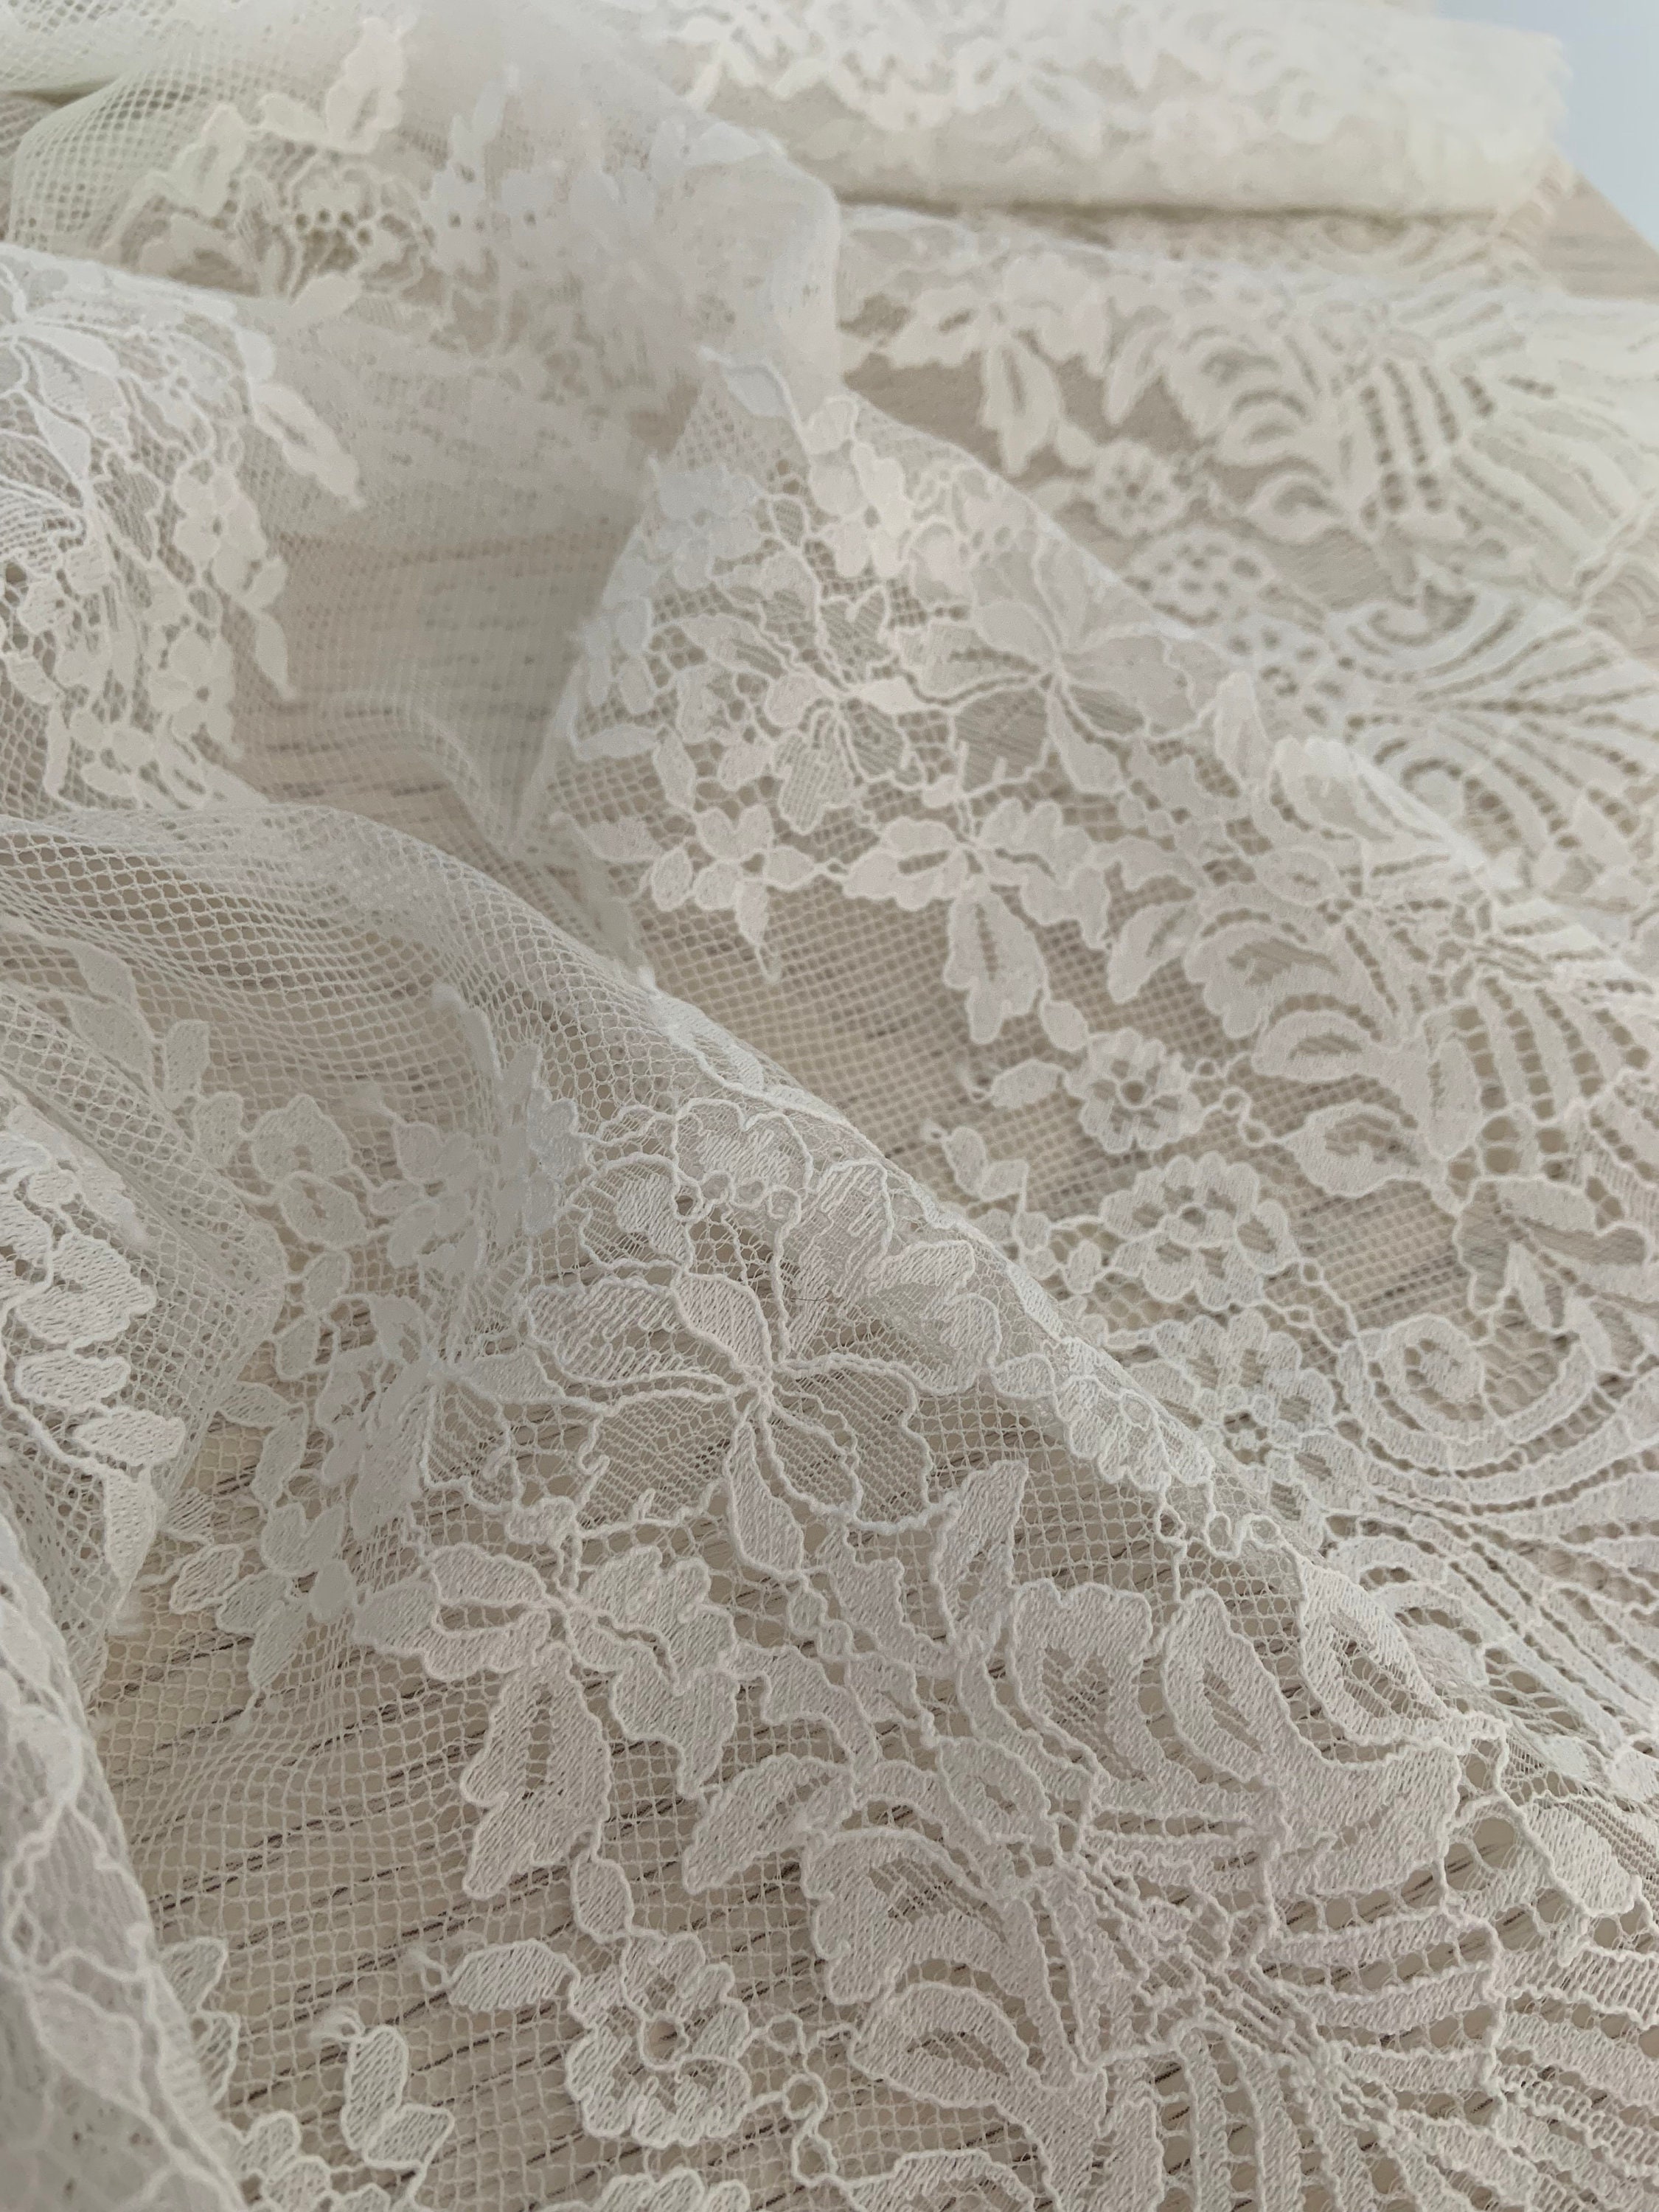 Ivory Chantilly Lace Fabric With Double Scallops by the Yard - Etsy